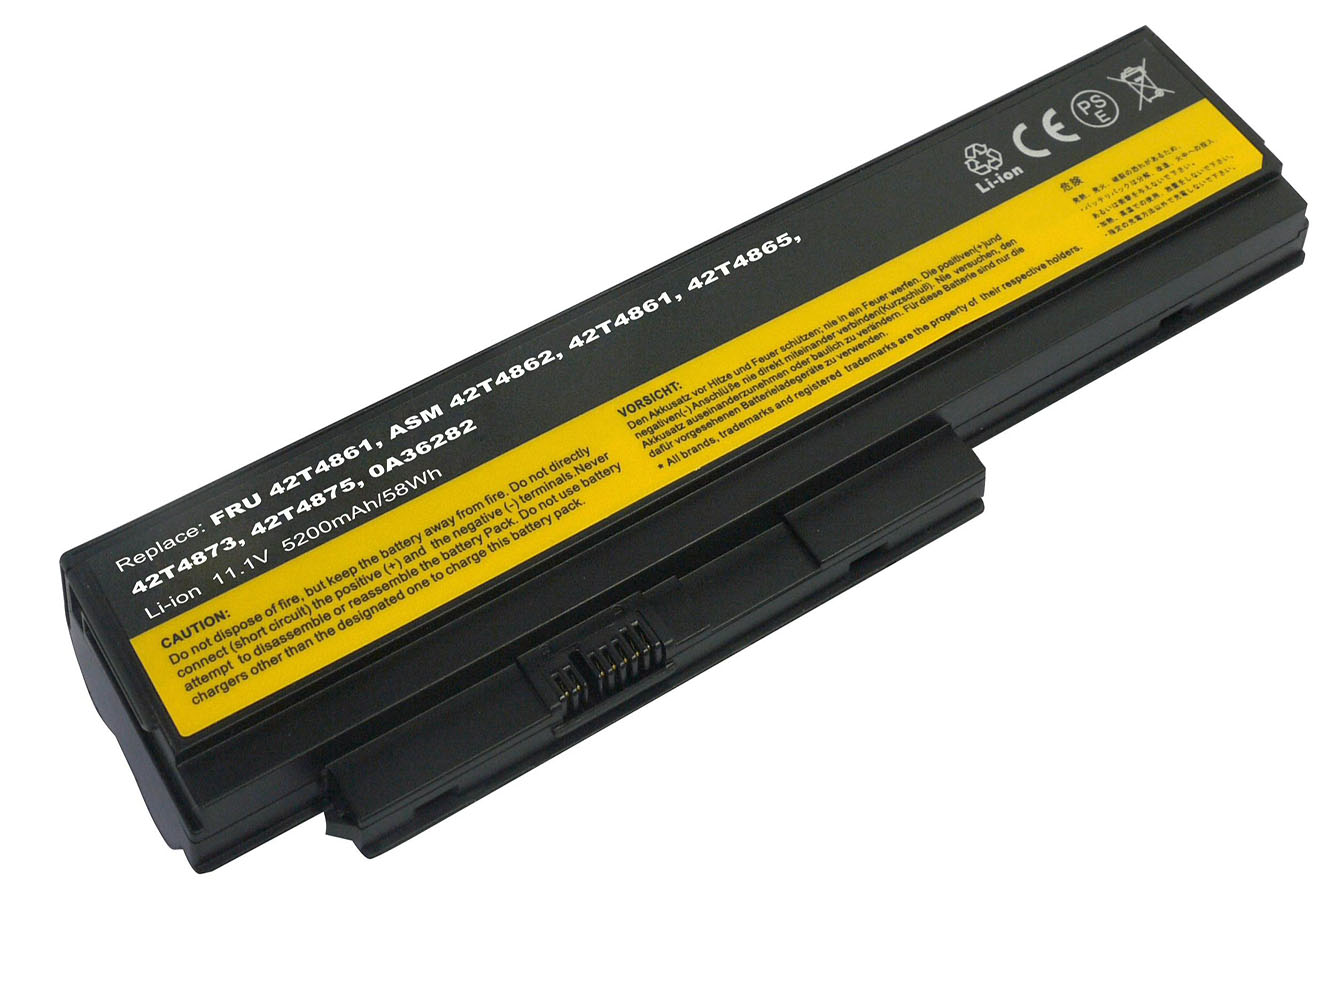 0A36282, 42T4875 replacement Laptop Battery for Lenovo ThinkPad X220, ThinkPad X220i, 6 cells, 5200mAh, 11.10V